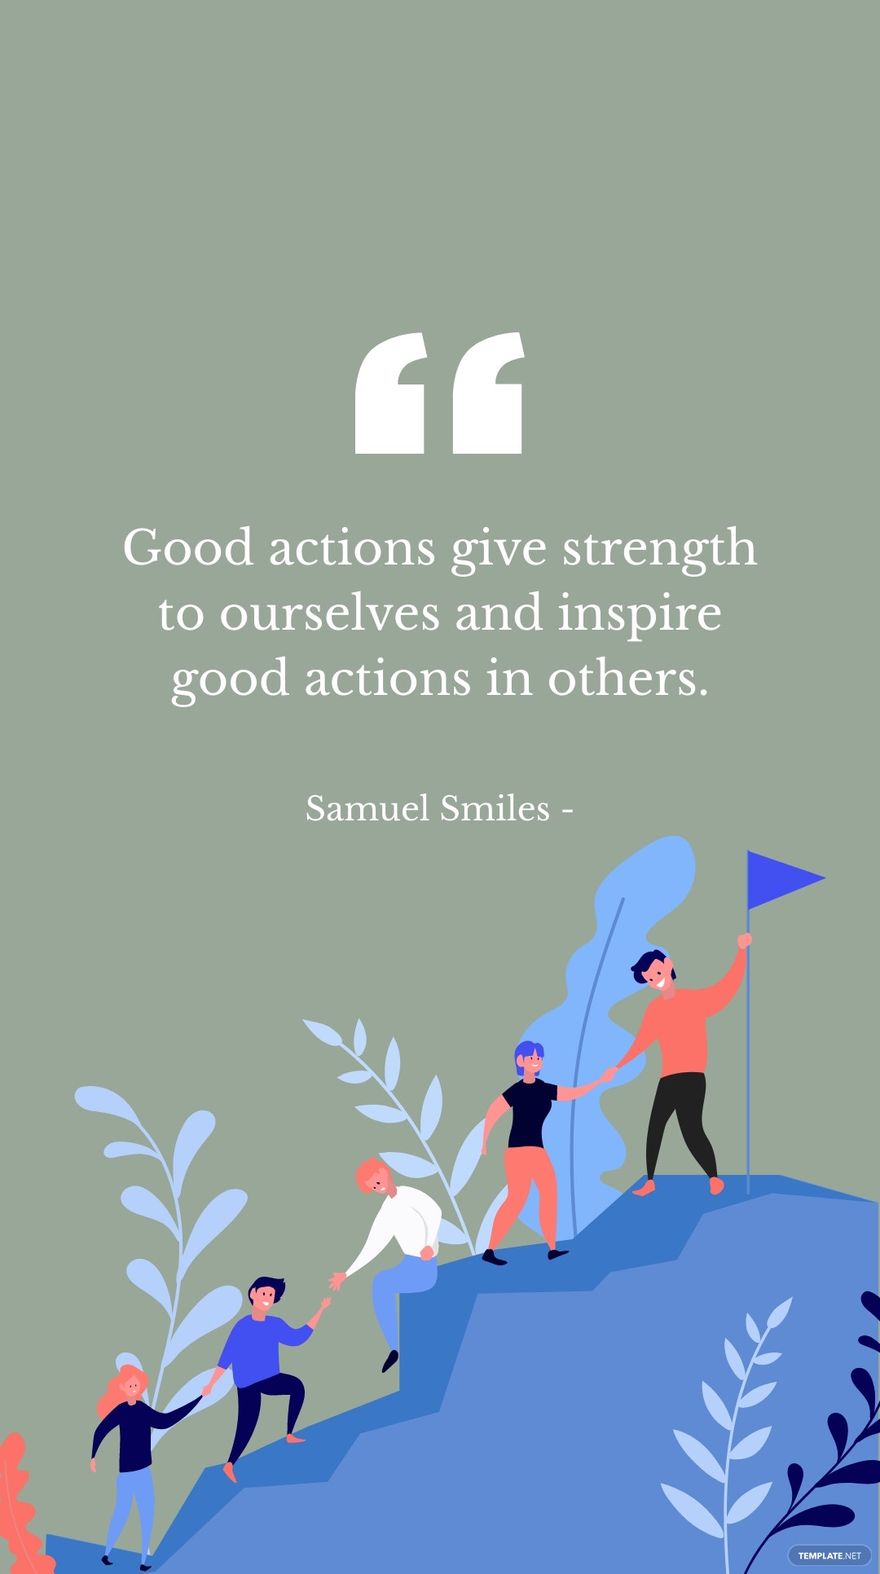 Free Samuel Smiles - Good actions give strength to ourselves and inspire good actions in others. in JPG